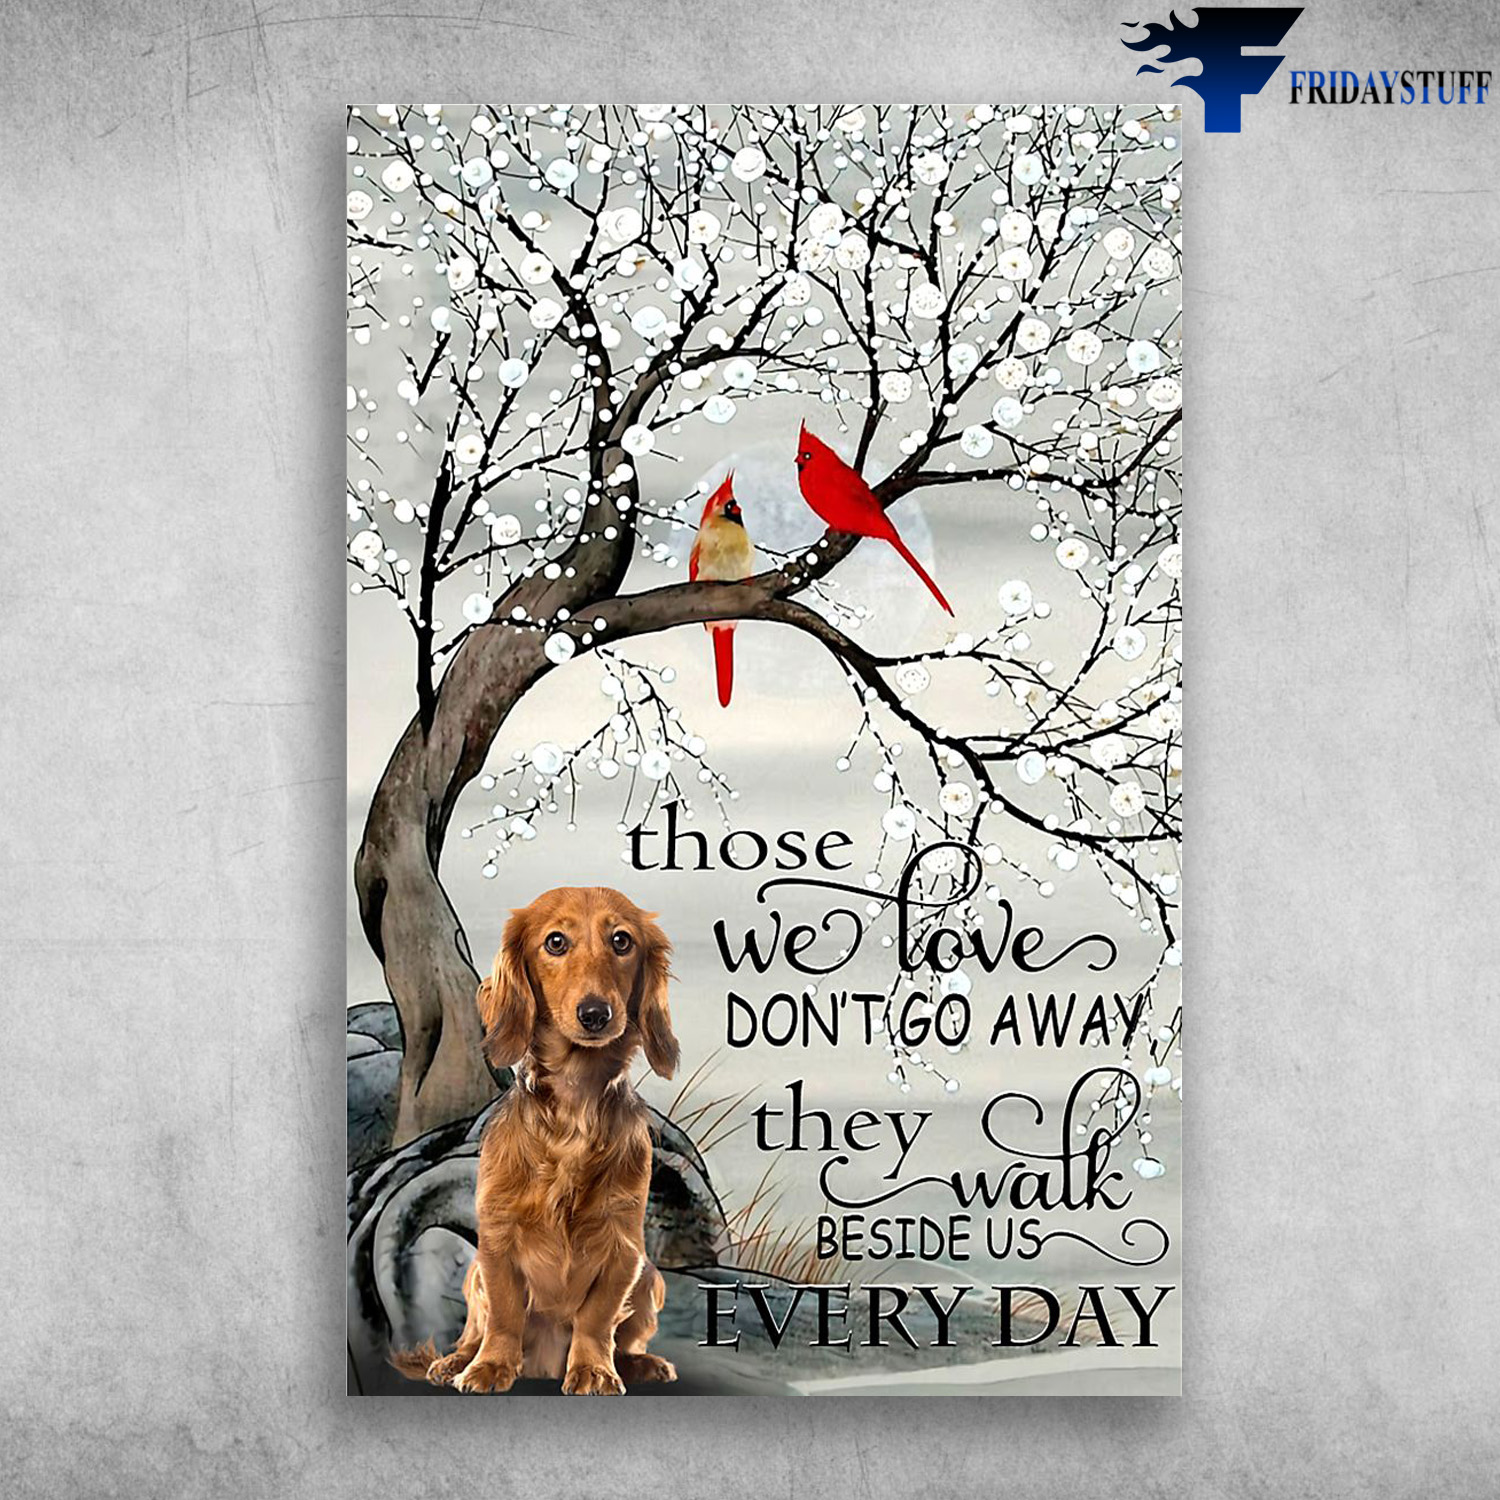 Golden Dogs And Cardinal Bird In The Winter - Those We Love, Don't Go Away, They Walk Beside Us Everyday